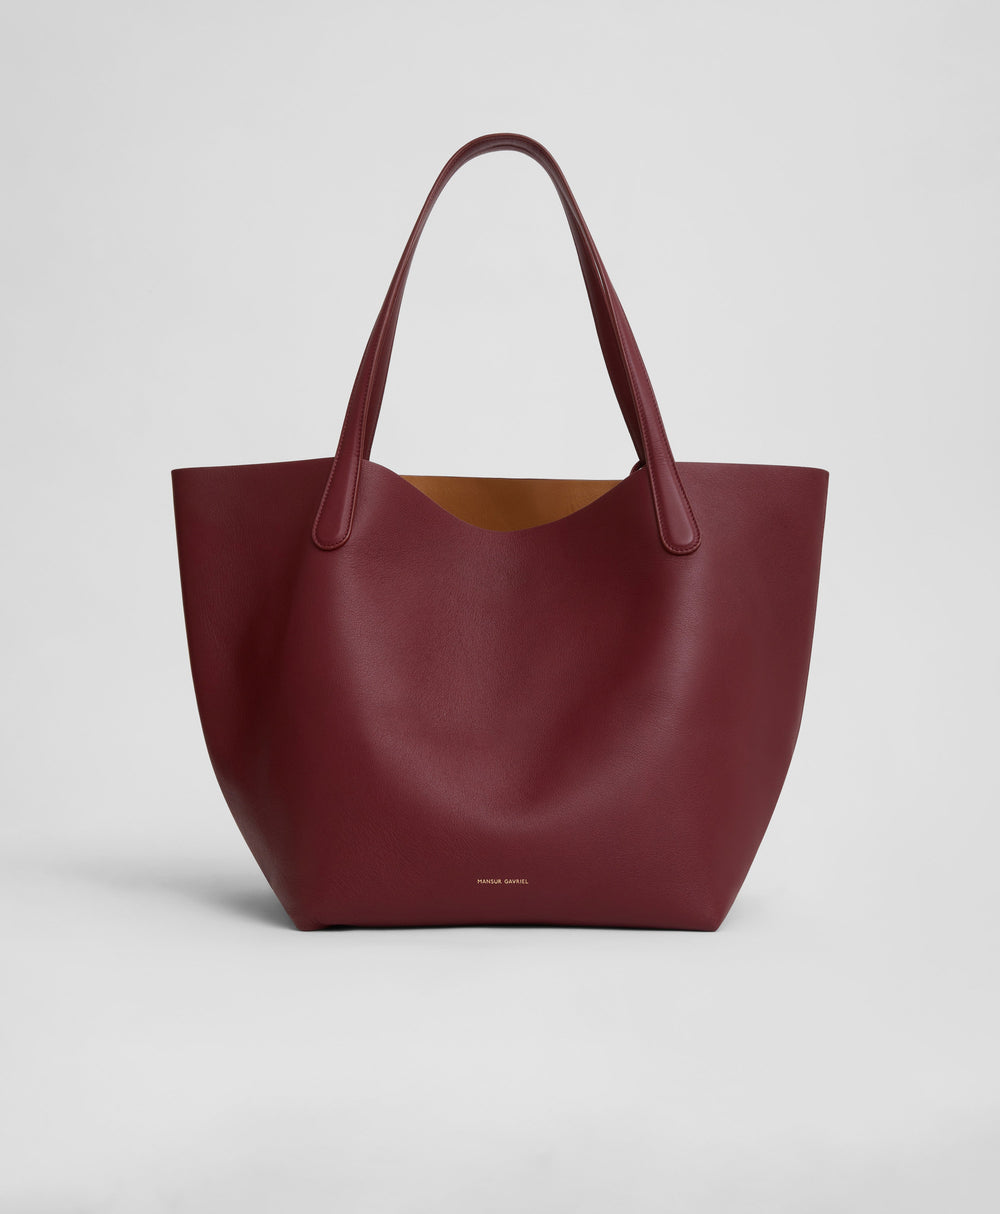 Mansur Gavriel Made in Italy Camel Beige Multitude Tote Leather